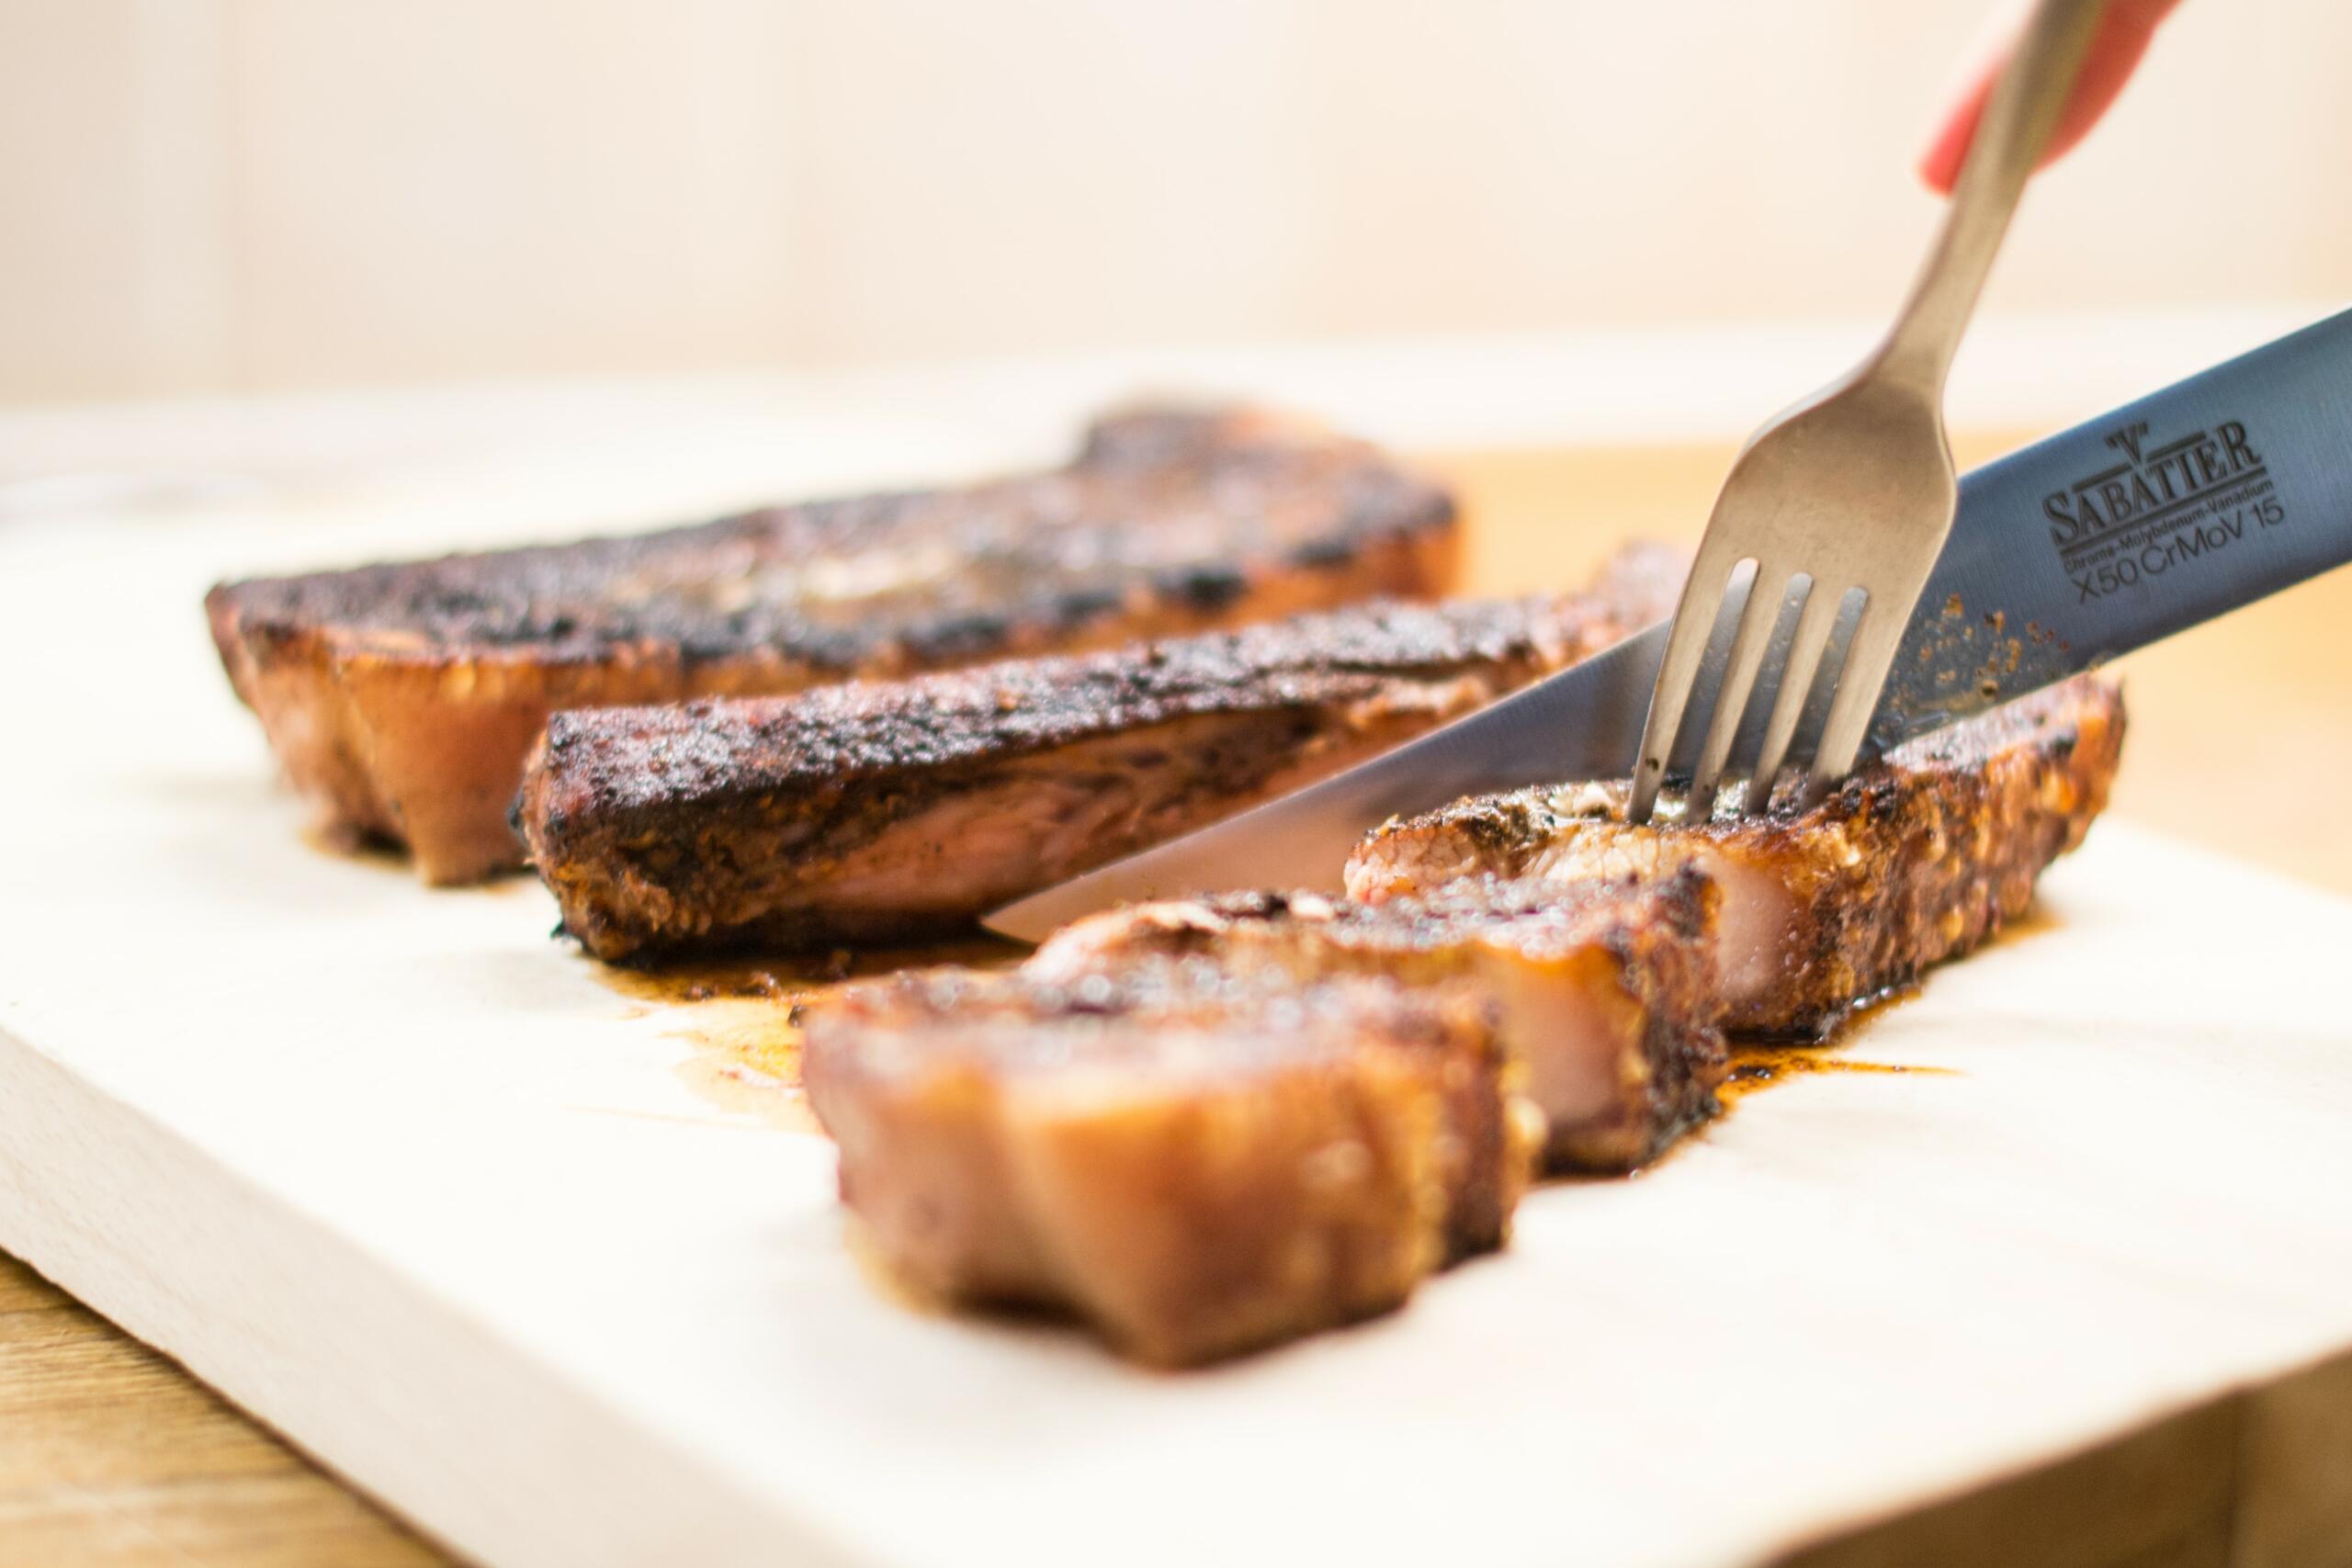 slicing cooked pork belly with a knife and fork